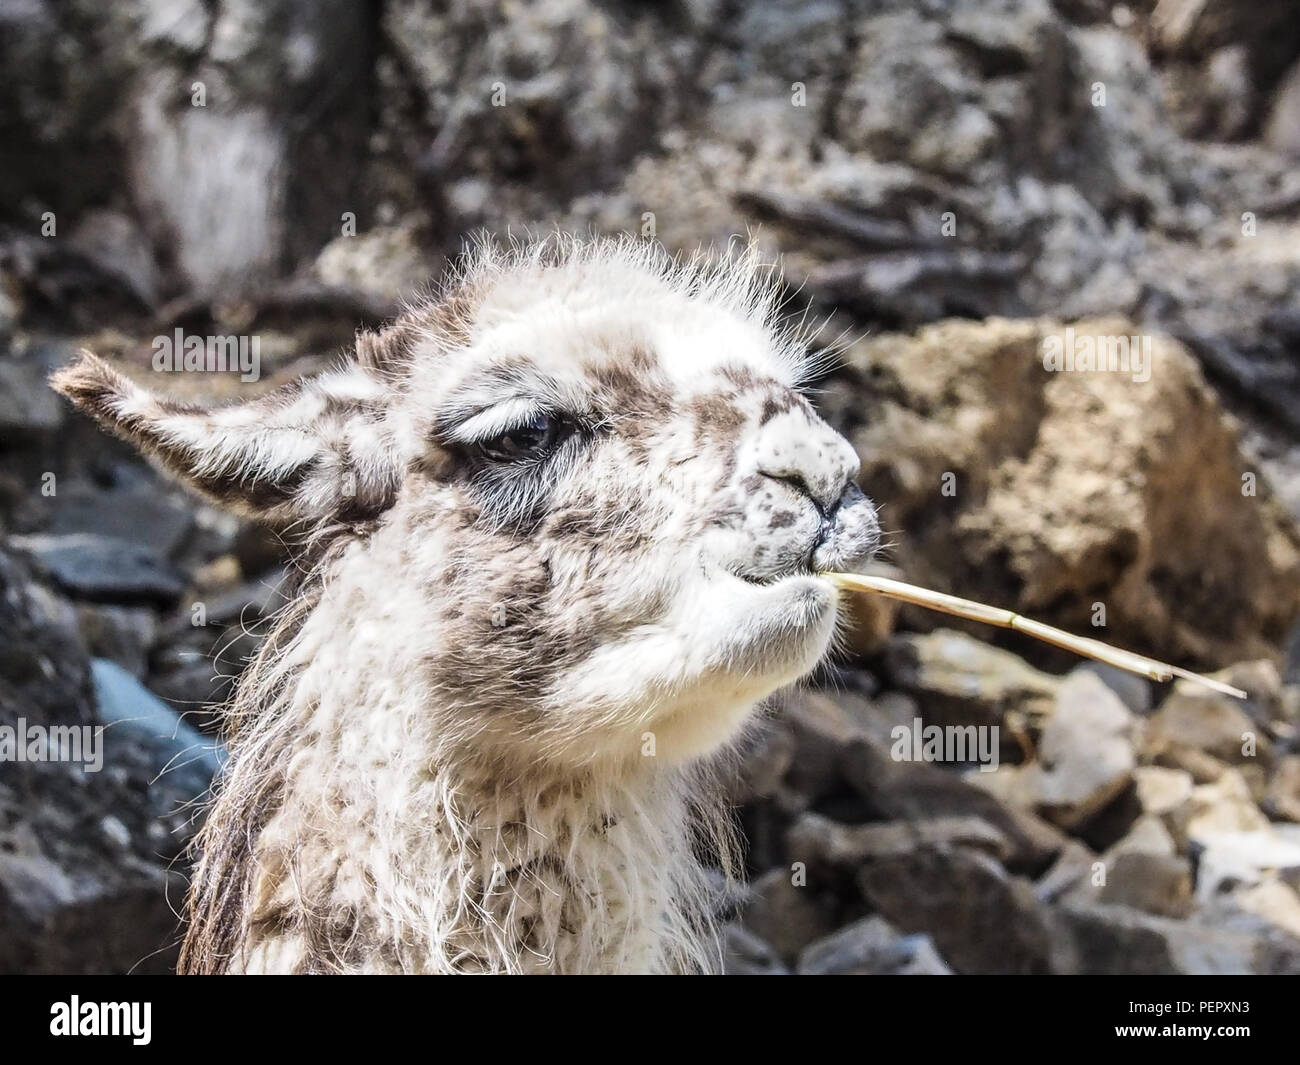 A funny Llama close-up eating grass and chewing, Lake Titicaca, Isla del Sol, Bolivia Stock Photo